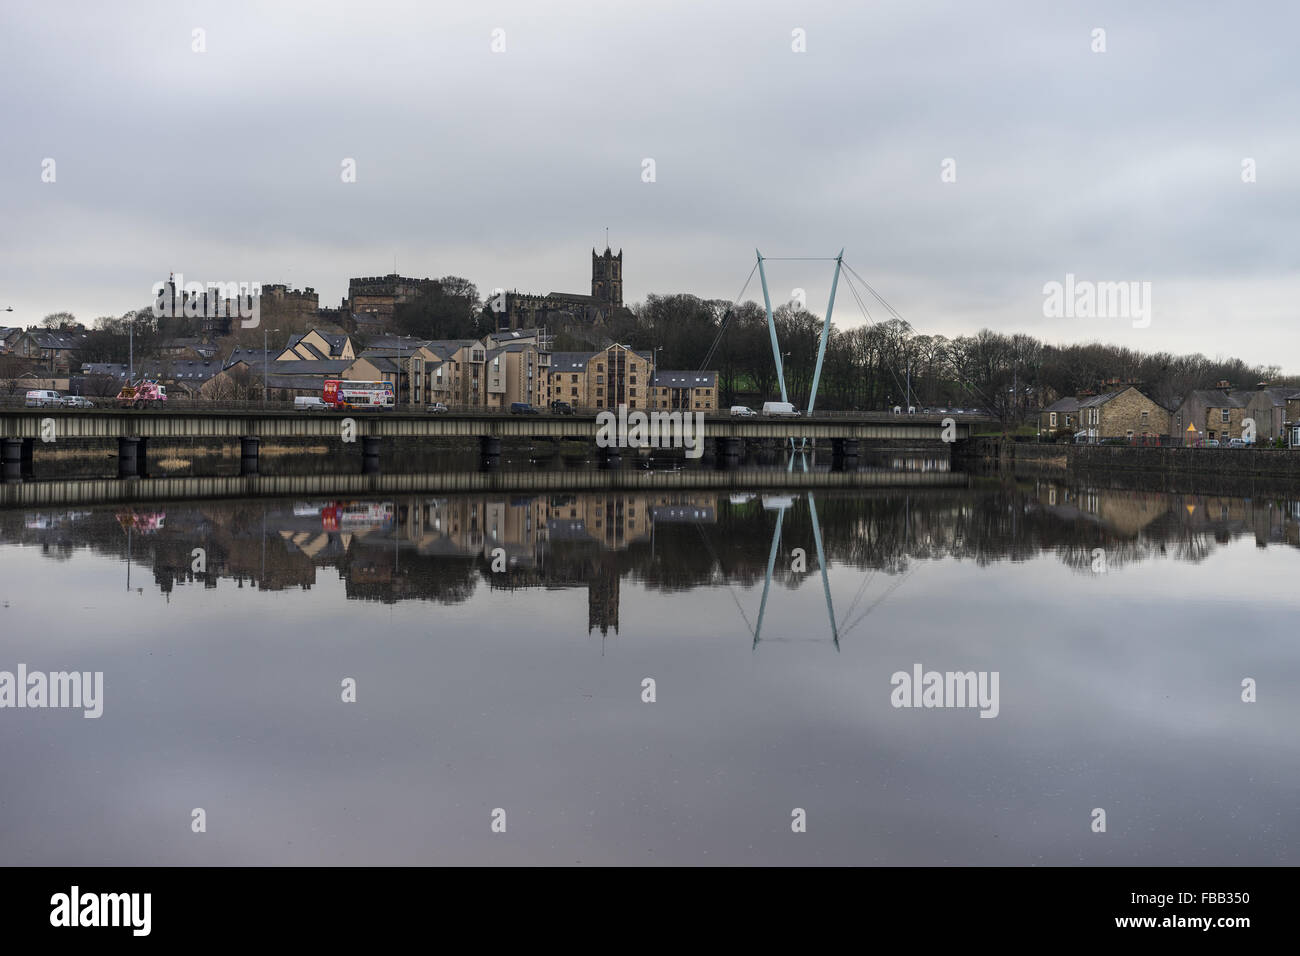 Shots from a walk along the River Lune in winter, high tide made for great reflections and mood. Stock Photo